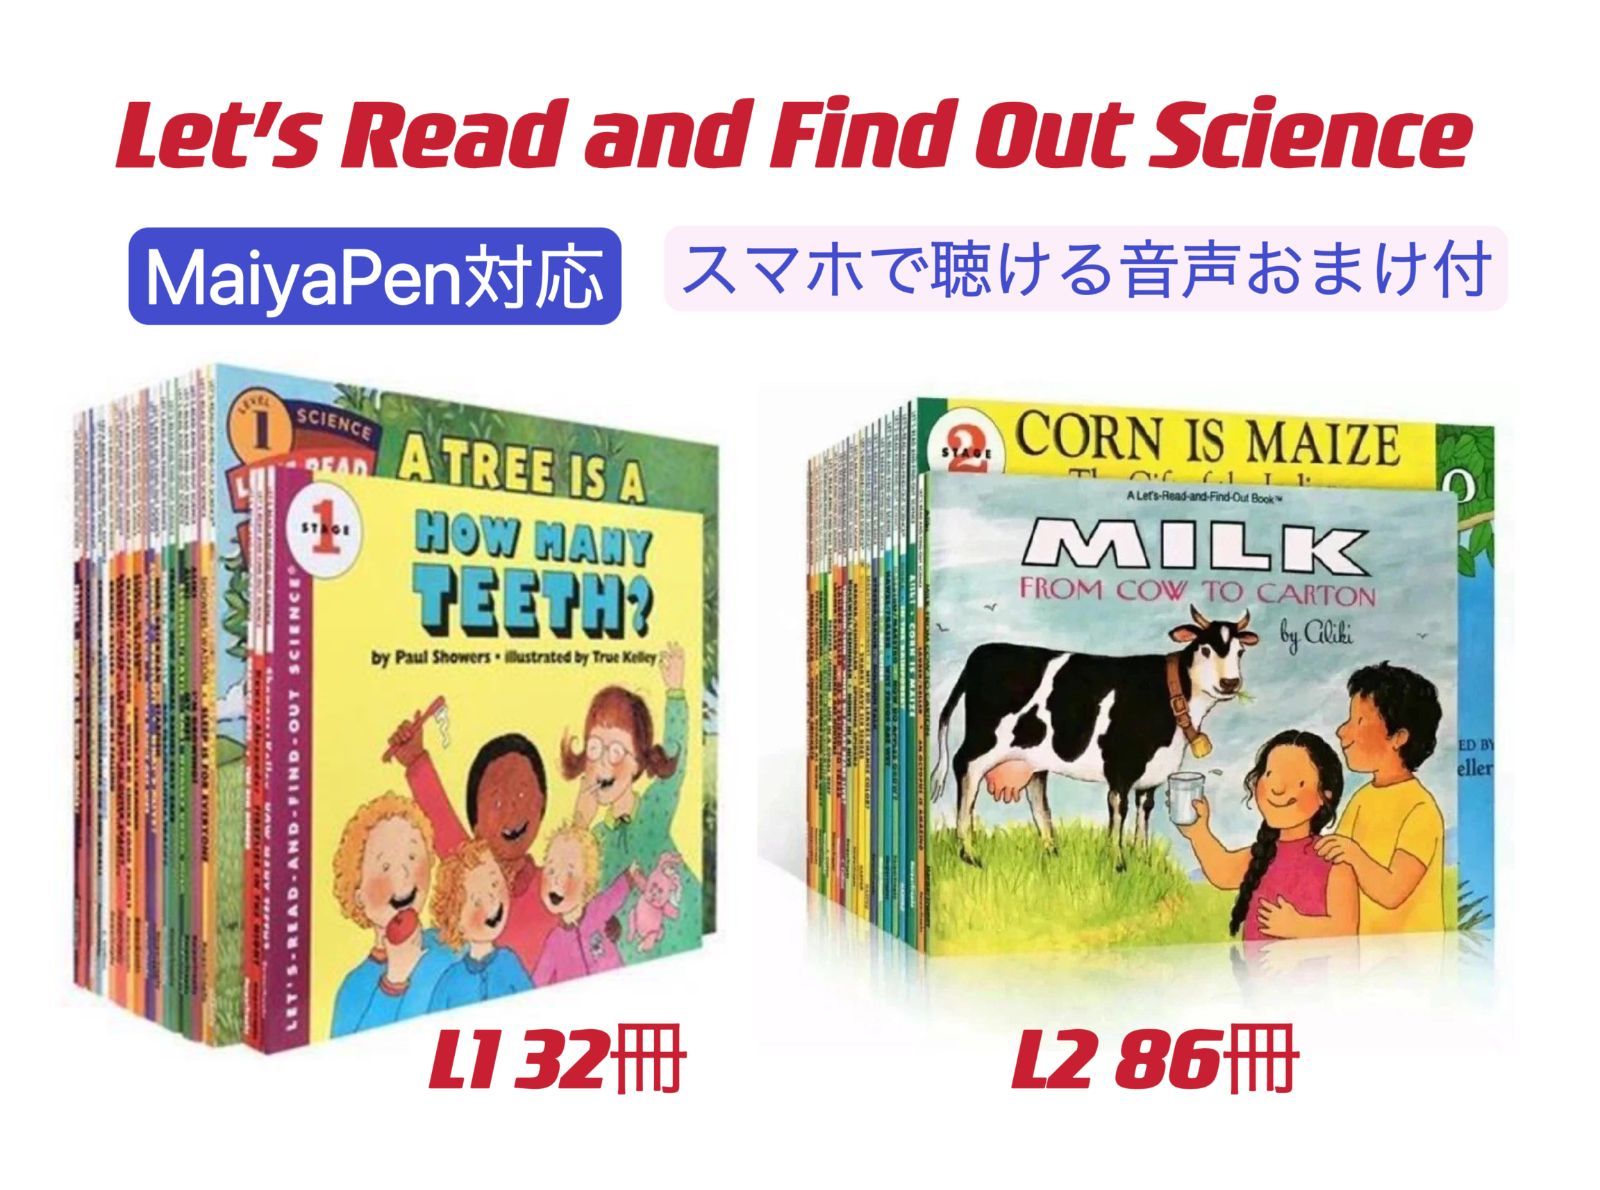 phonicsLet's Read and Find Out Science マイヤペン対応